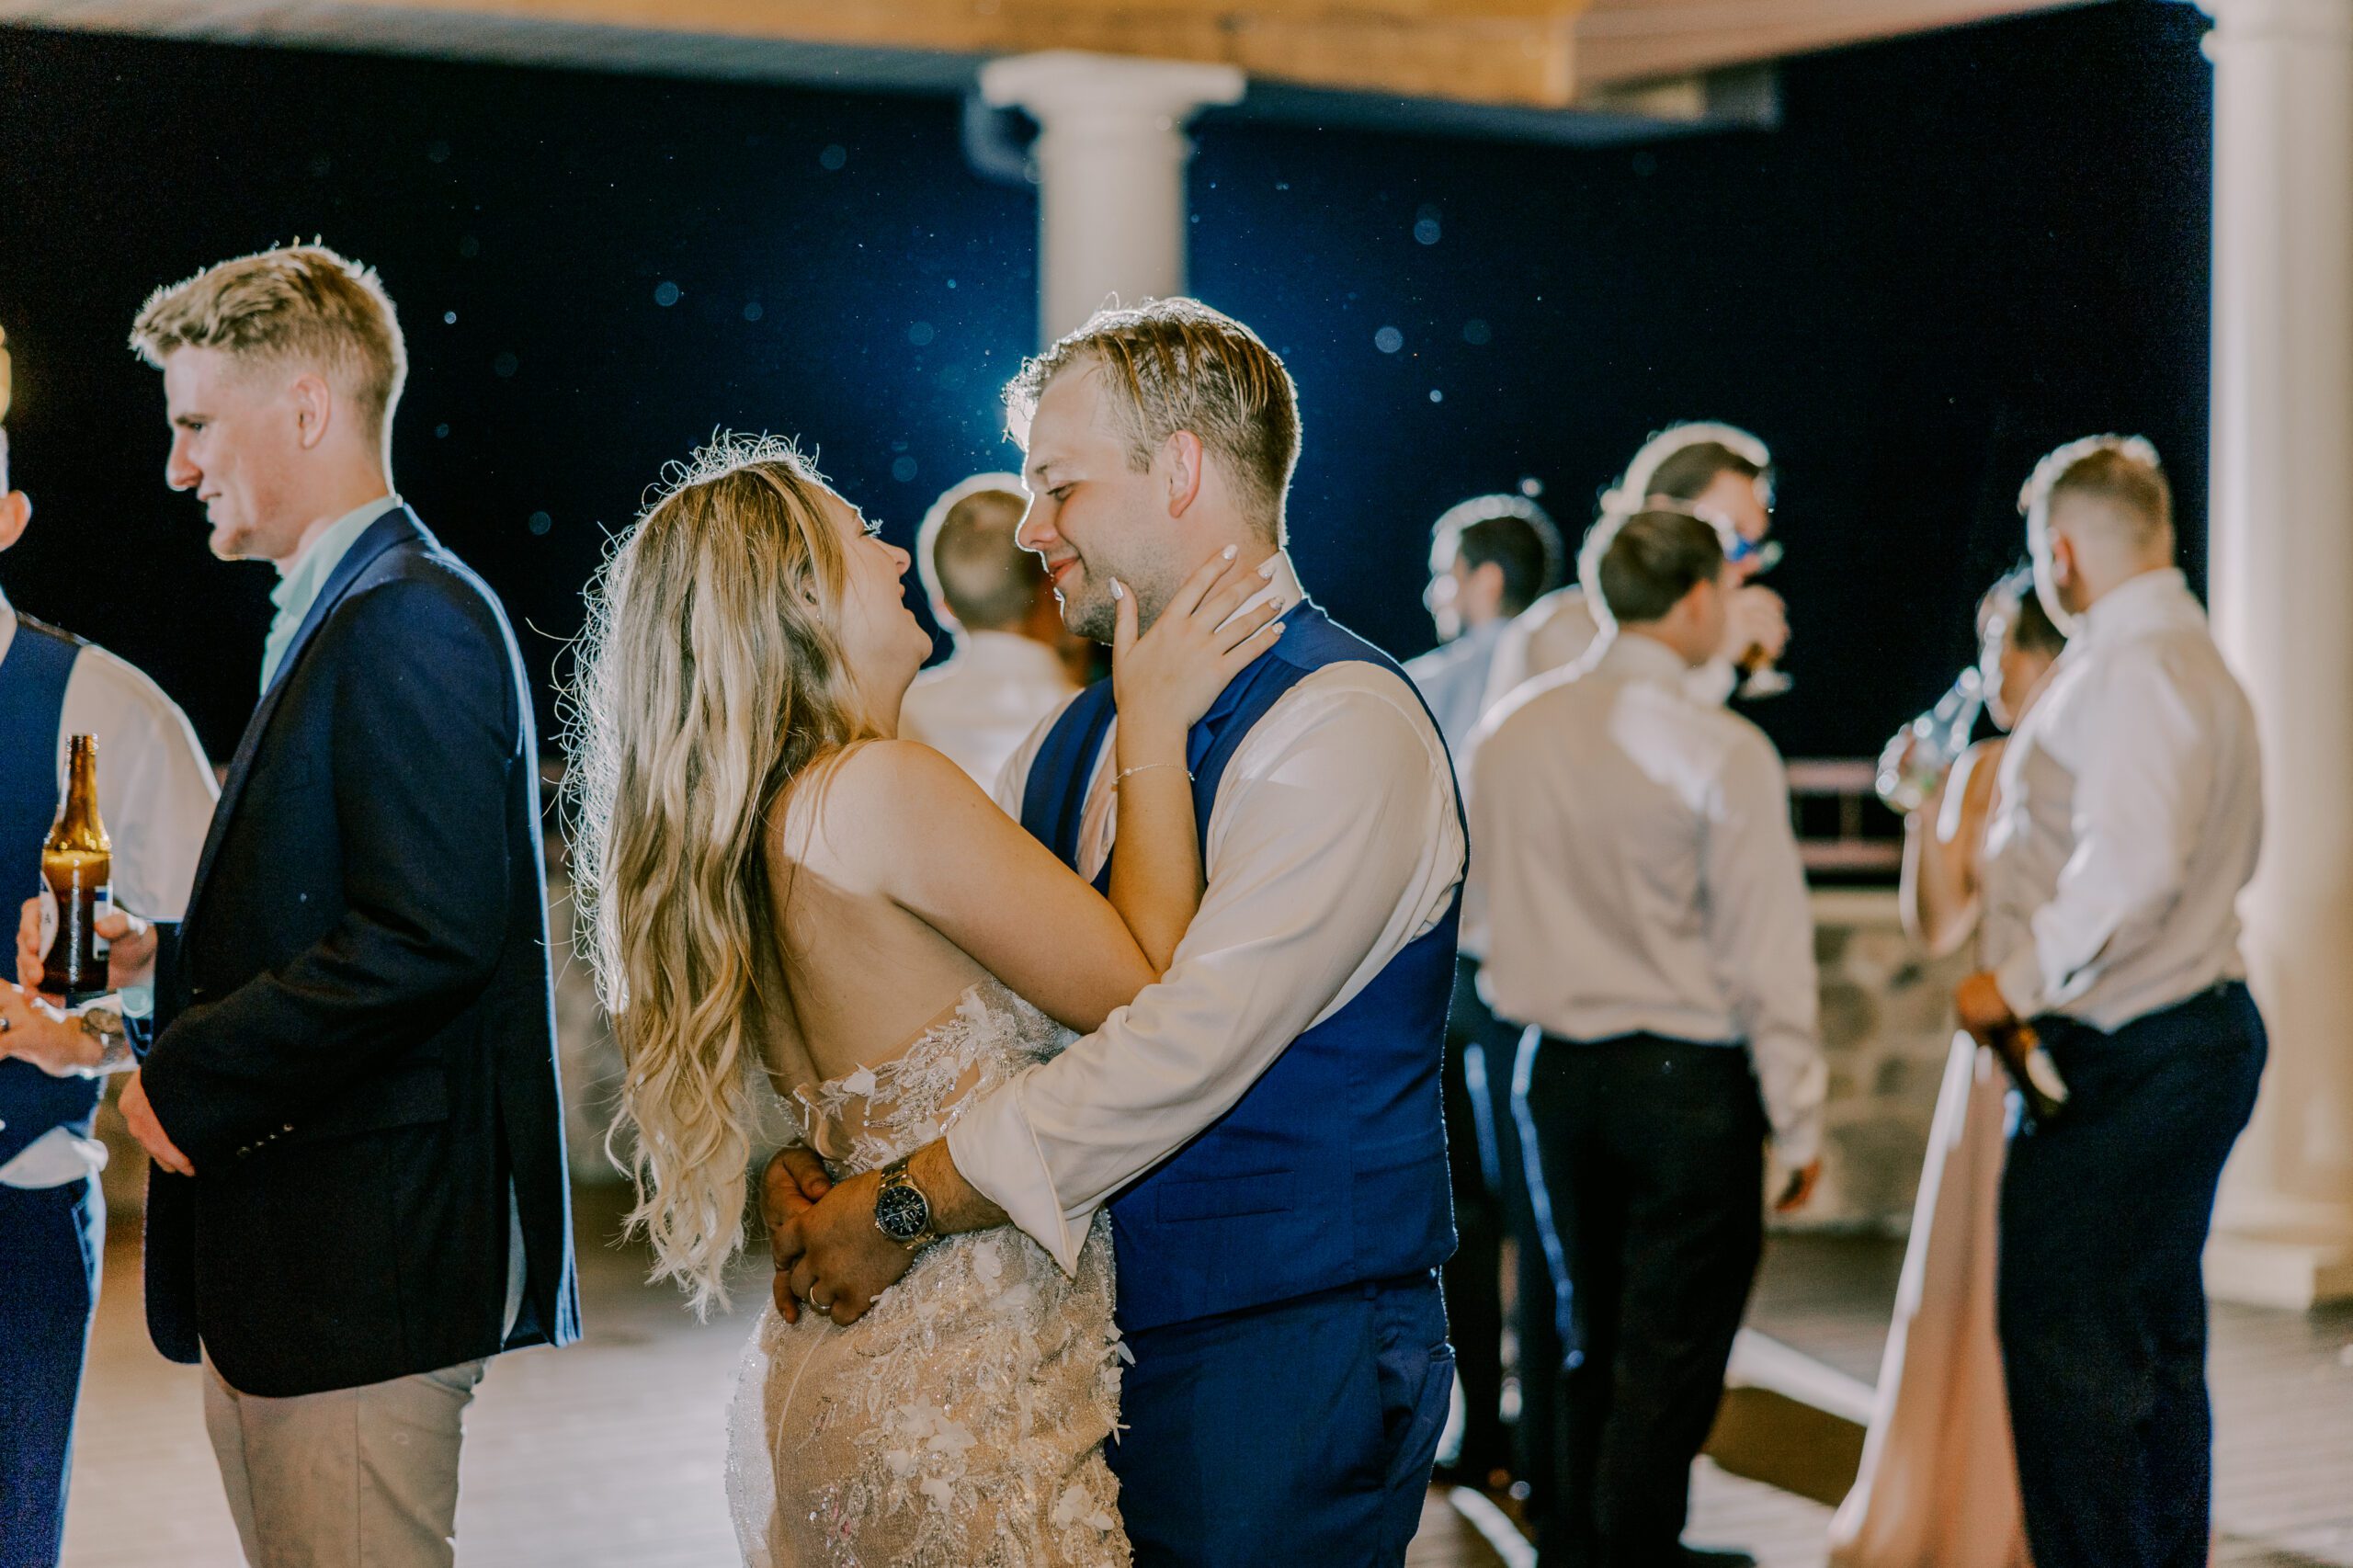 Bride and groom holding each other dancing as other guests dance in background